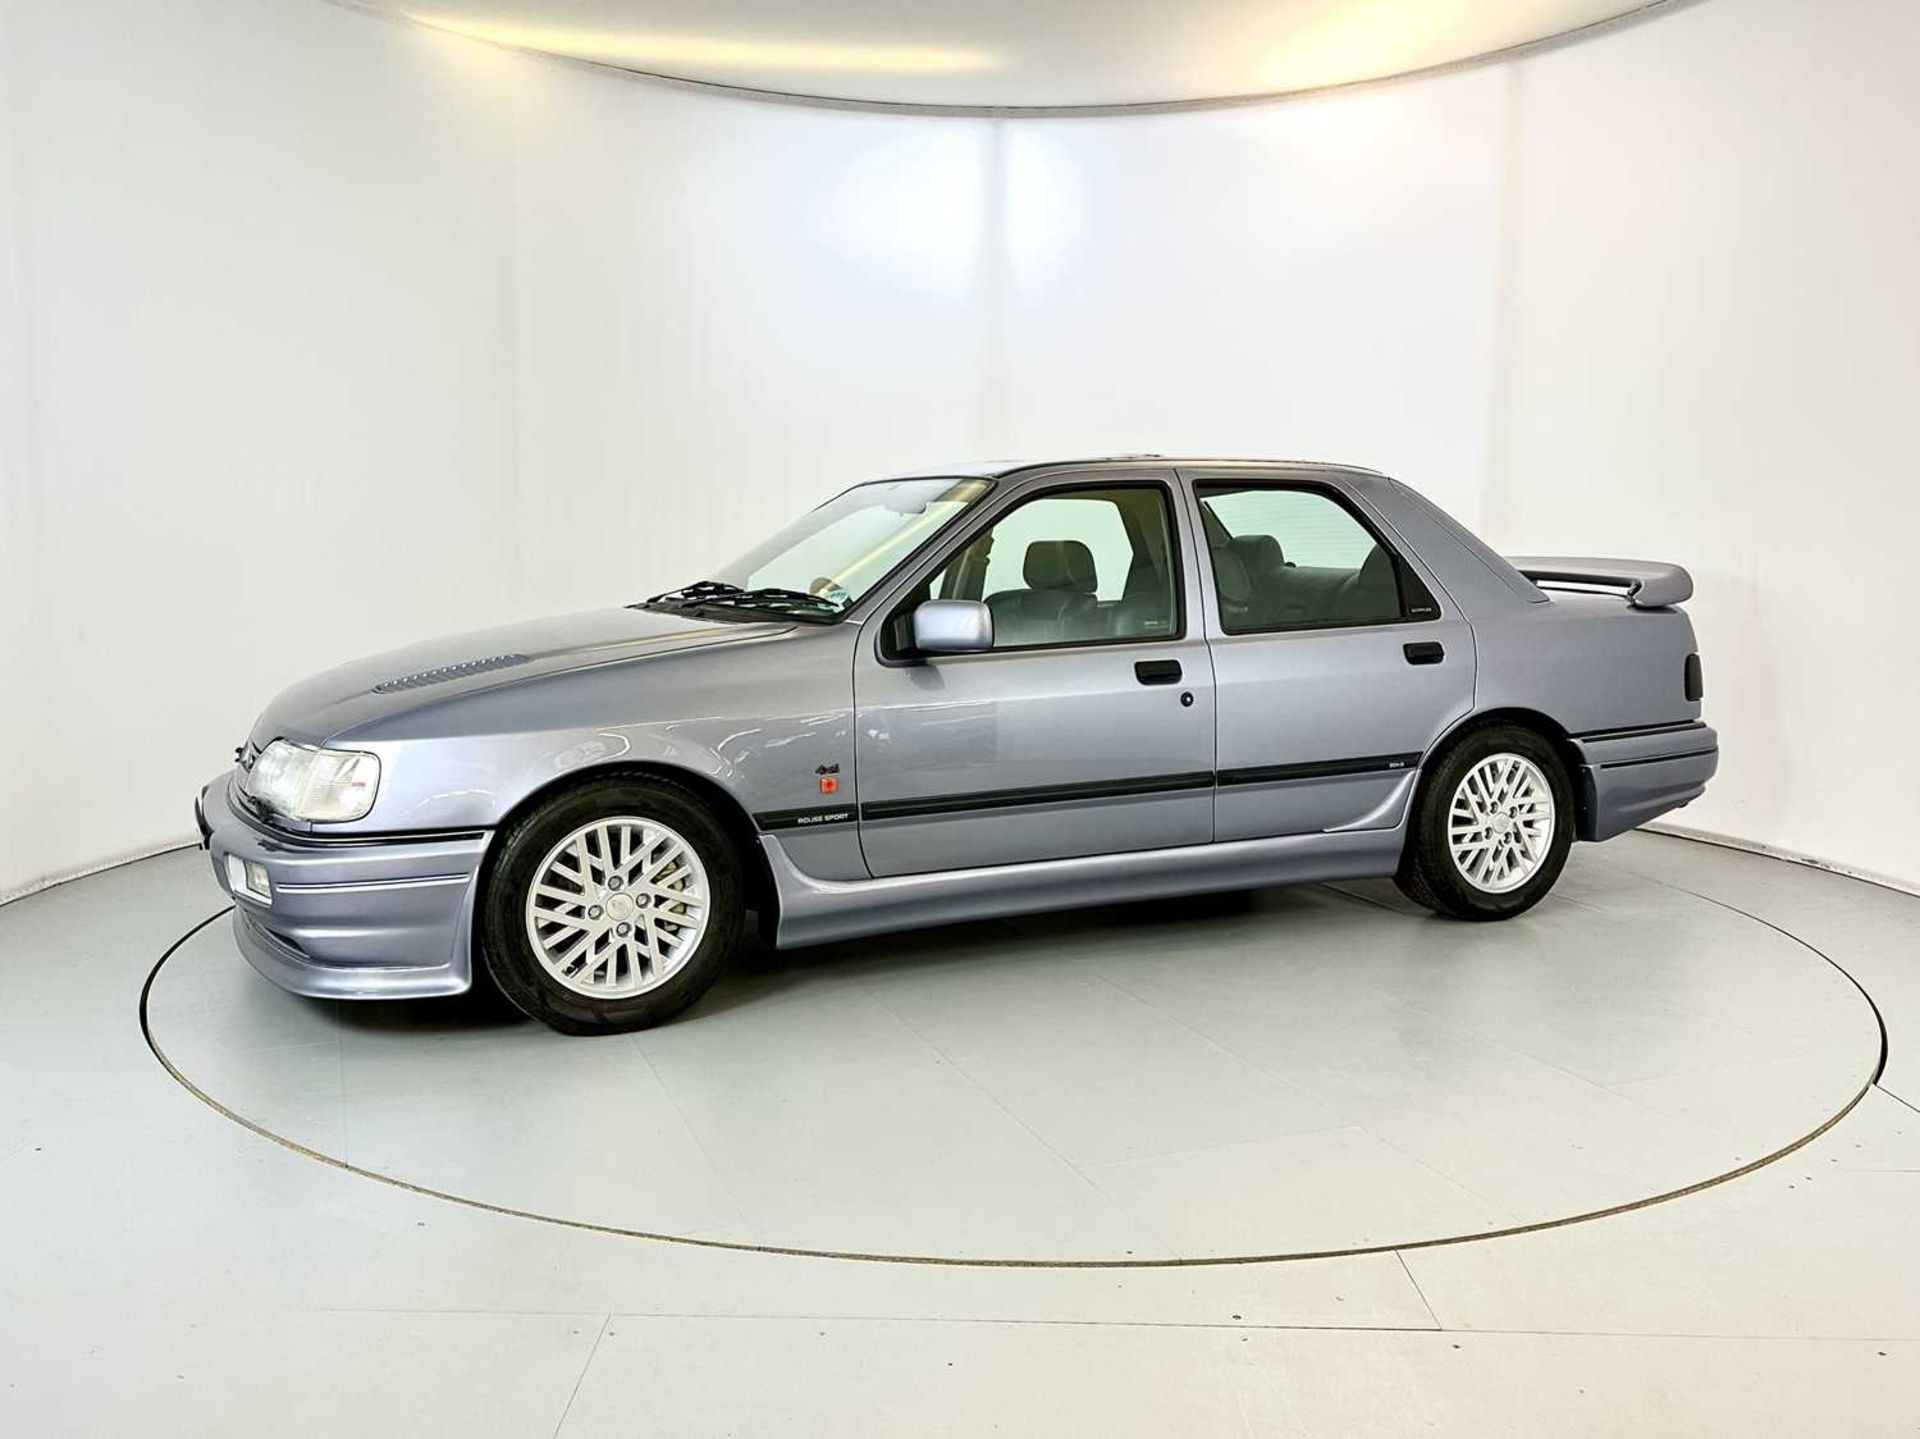 1991 Ford Sierra RS Cosworth Rouse Sport 304R - Image 4 of 40